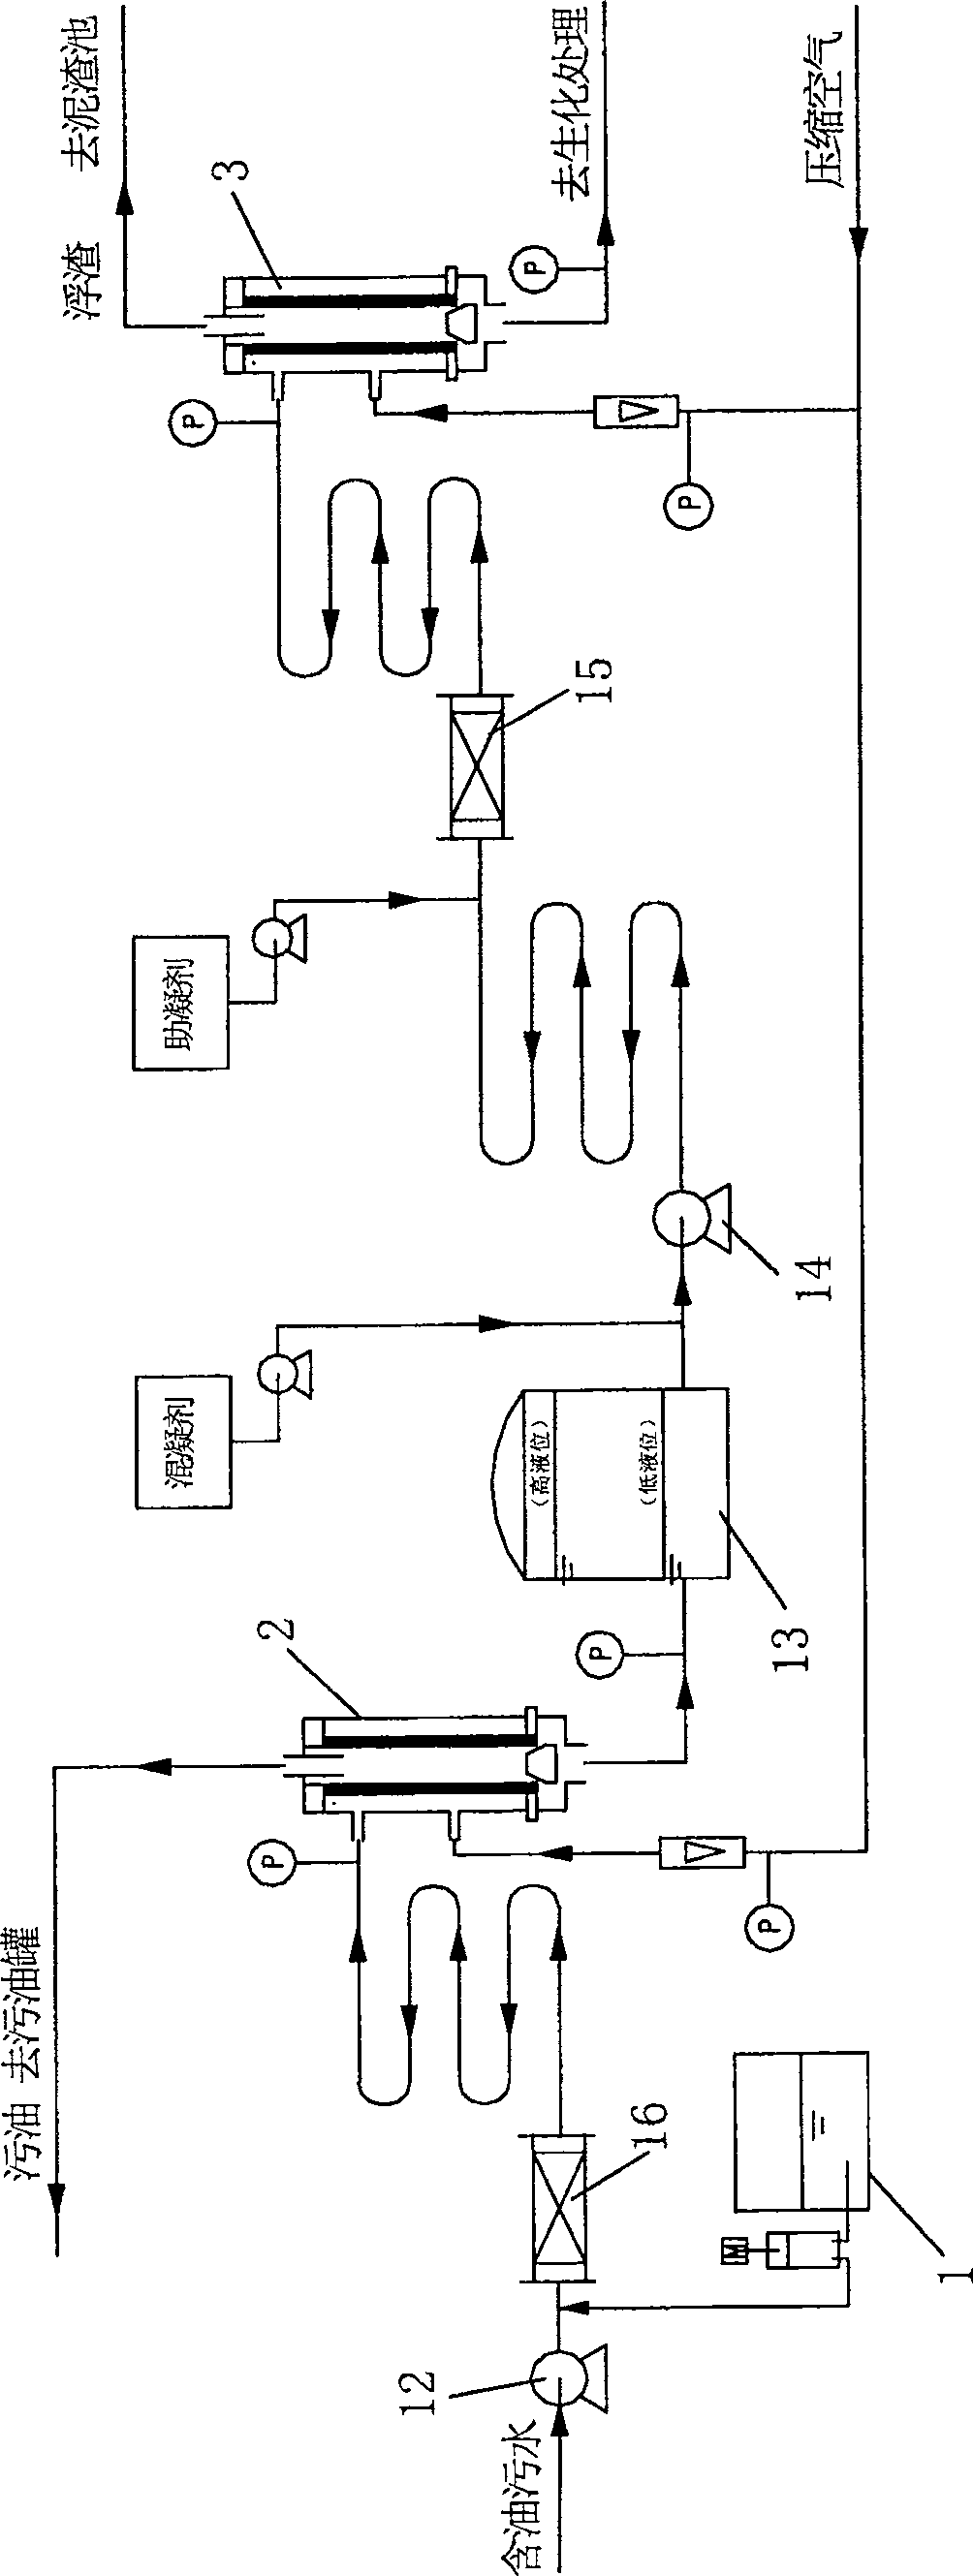 Method for treating oil refining sewage by employing multi-stage inflatable cyclonic current technology